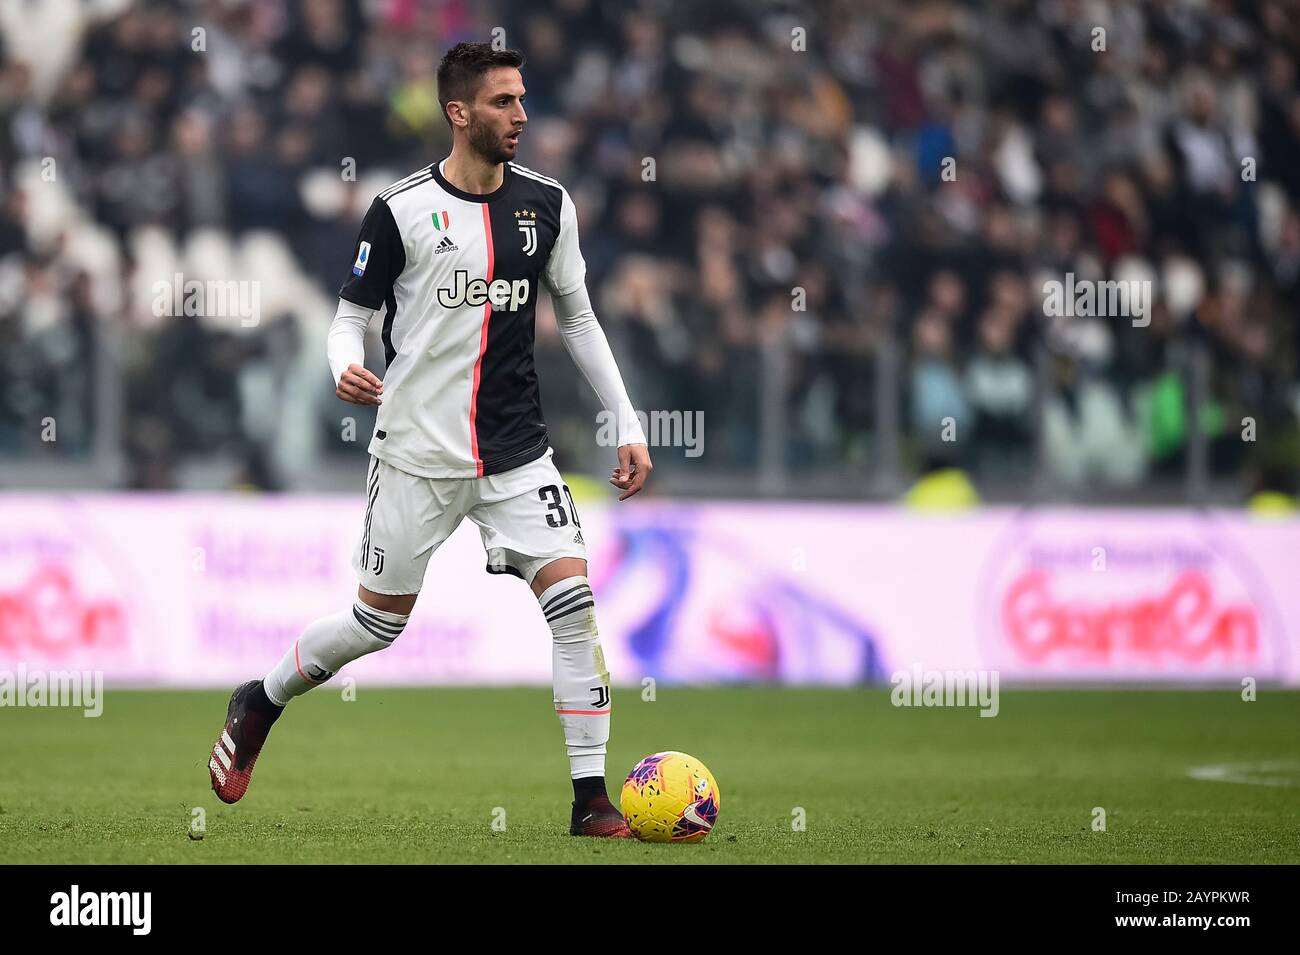 Turin, Italy - 16 February, 2020: Rodrigo Bentancur of Juventus FC in action during the Serie A football match between Juventus FC and Brescia Calcio. Juventus FC won 2-0 over Brescia Calcio. Credit: Nicolò Campo/Alamy Live News Stock Photo